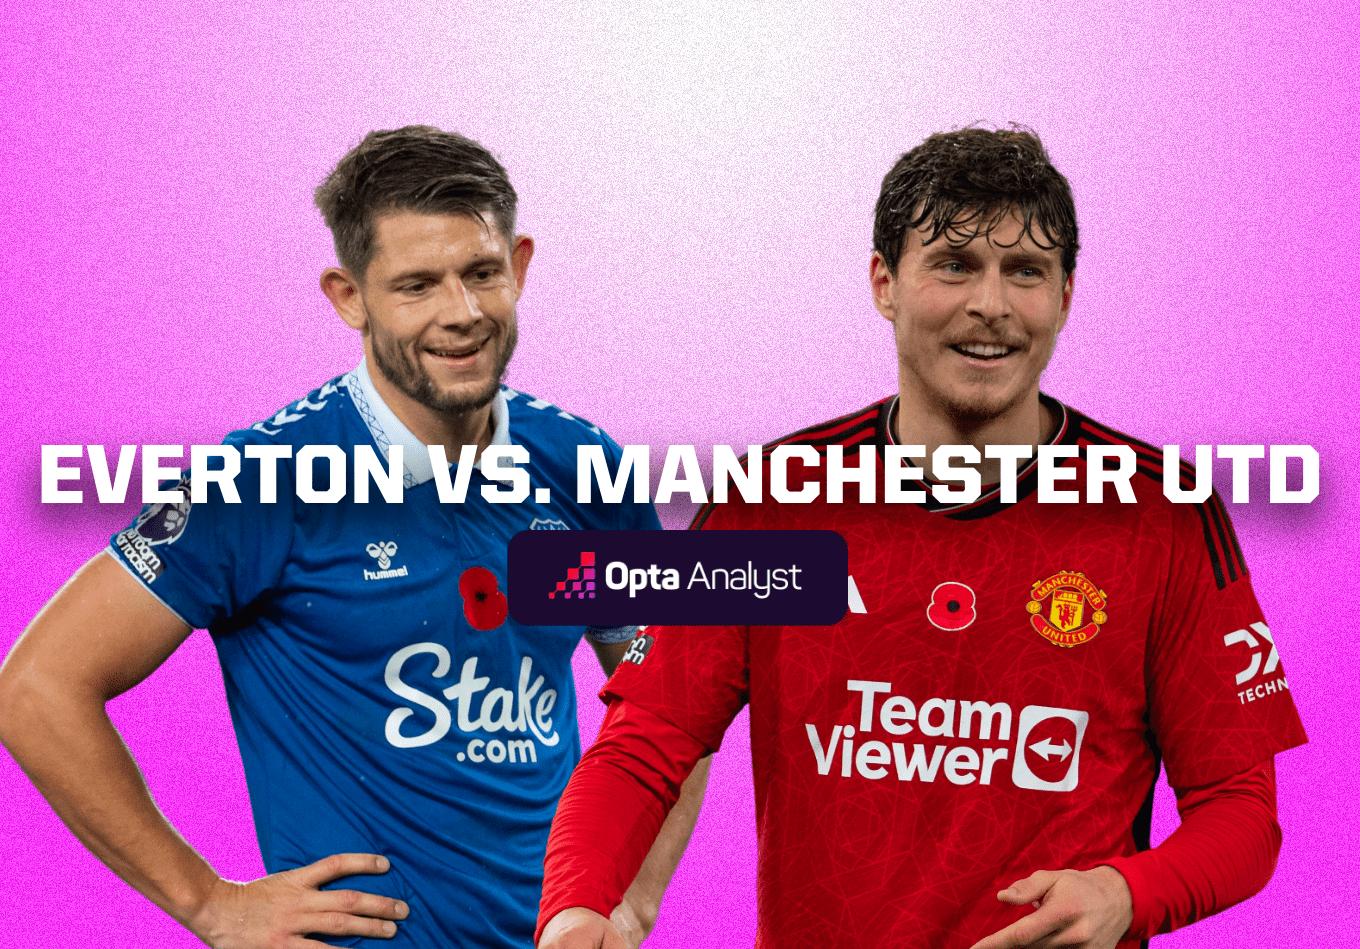 Everton vs Manchester United: Prediction and Preview